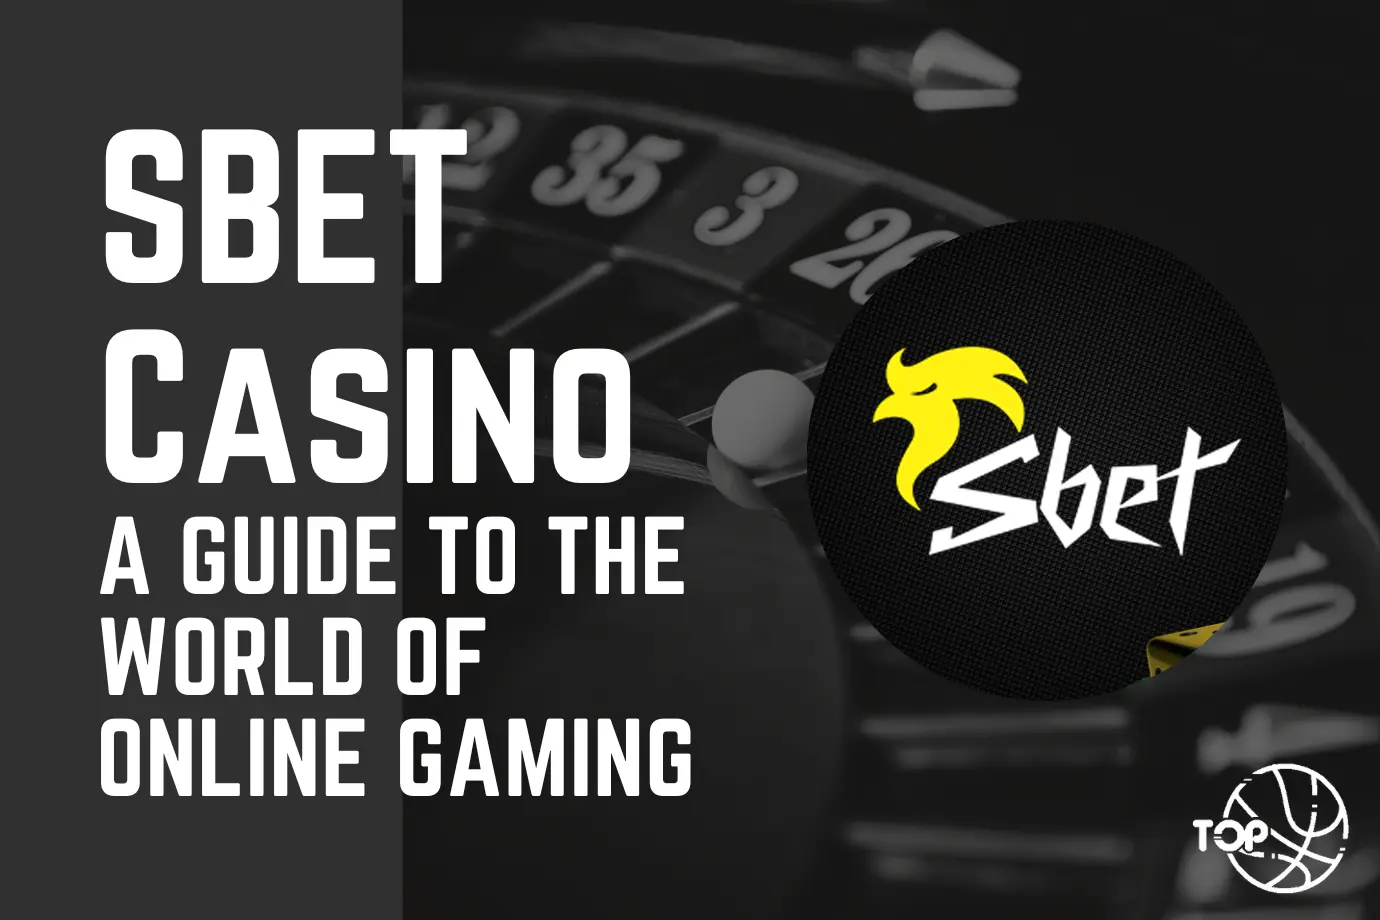 SBET Casino: A Guide to the World of Online Gaming